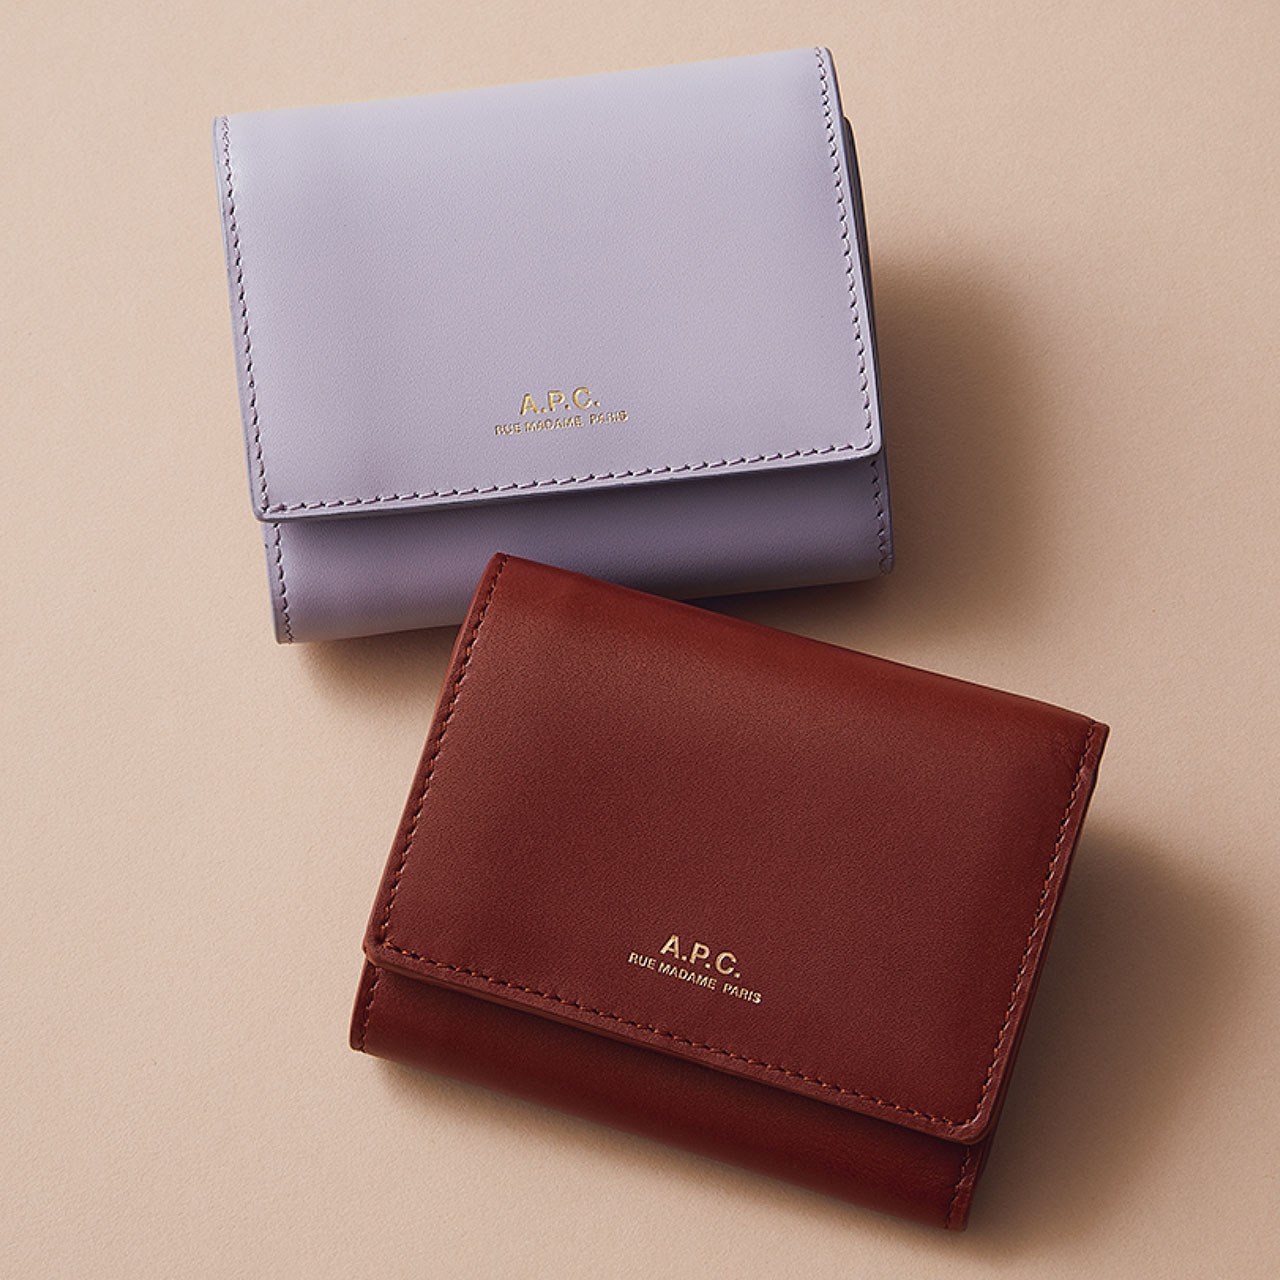 A.P.C.（アー・ペー・セー）　COMPACT LOIS SMALL